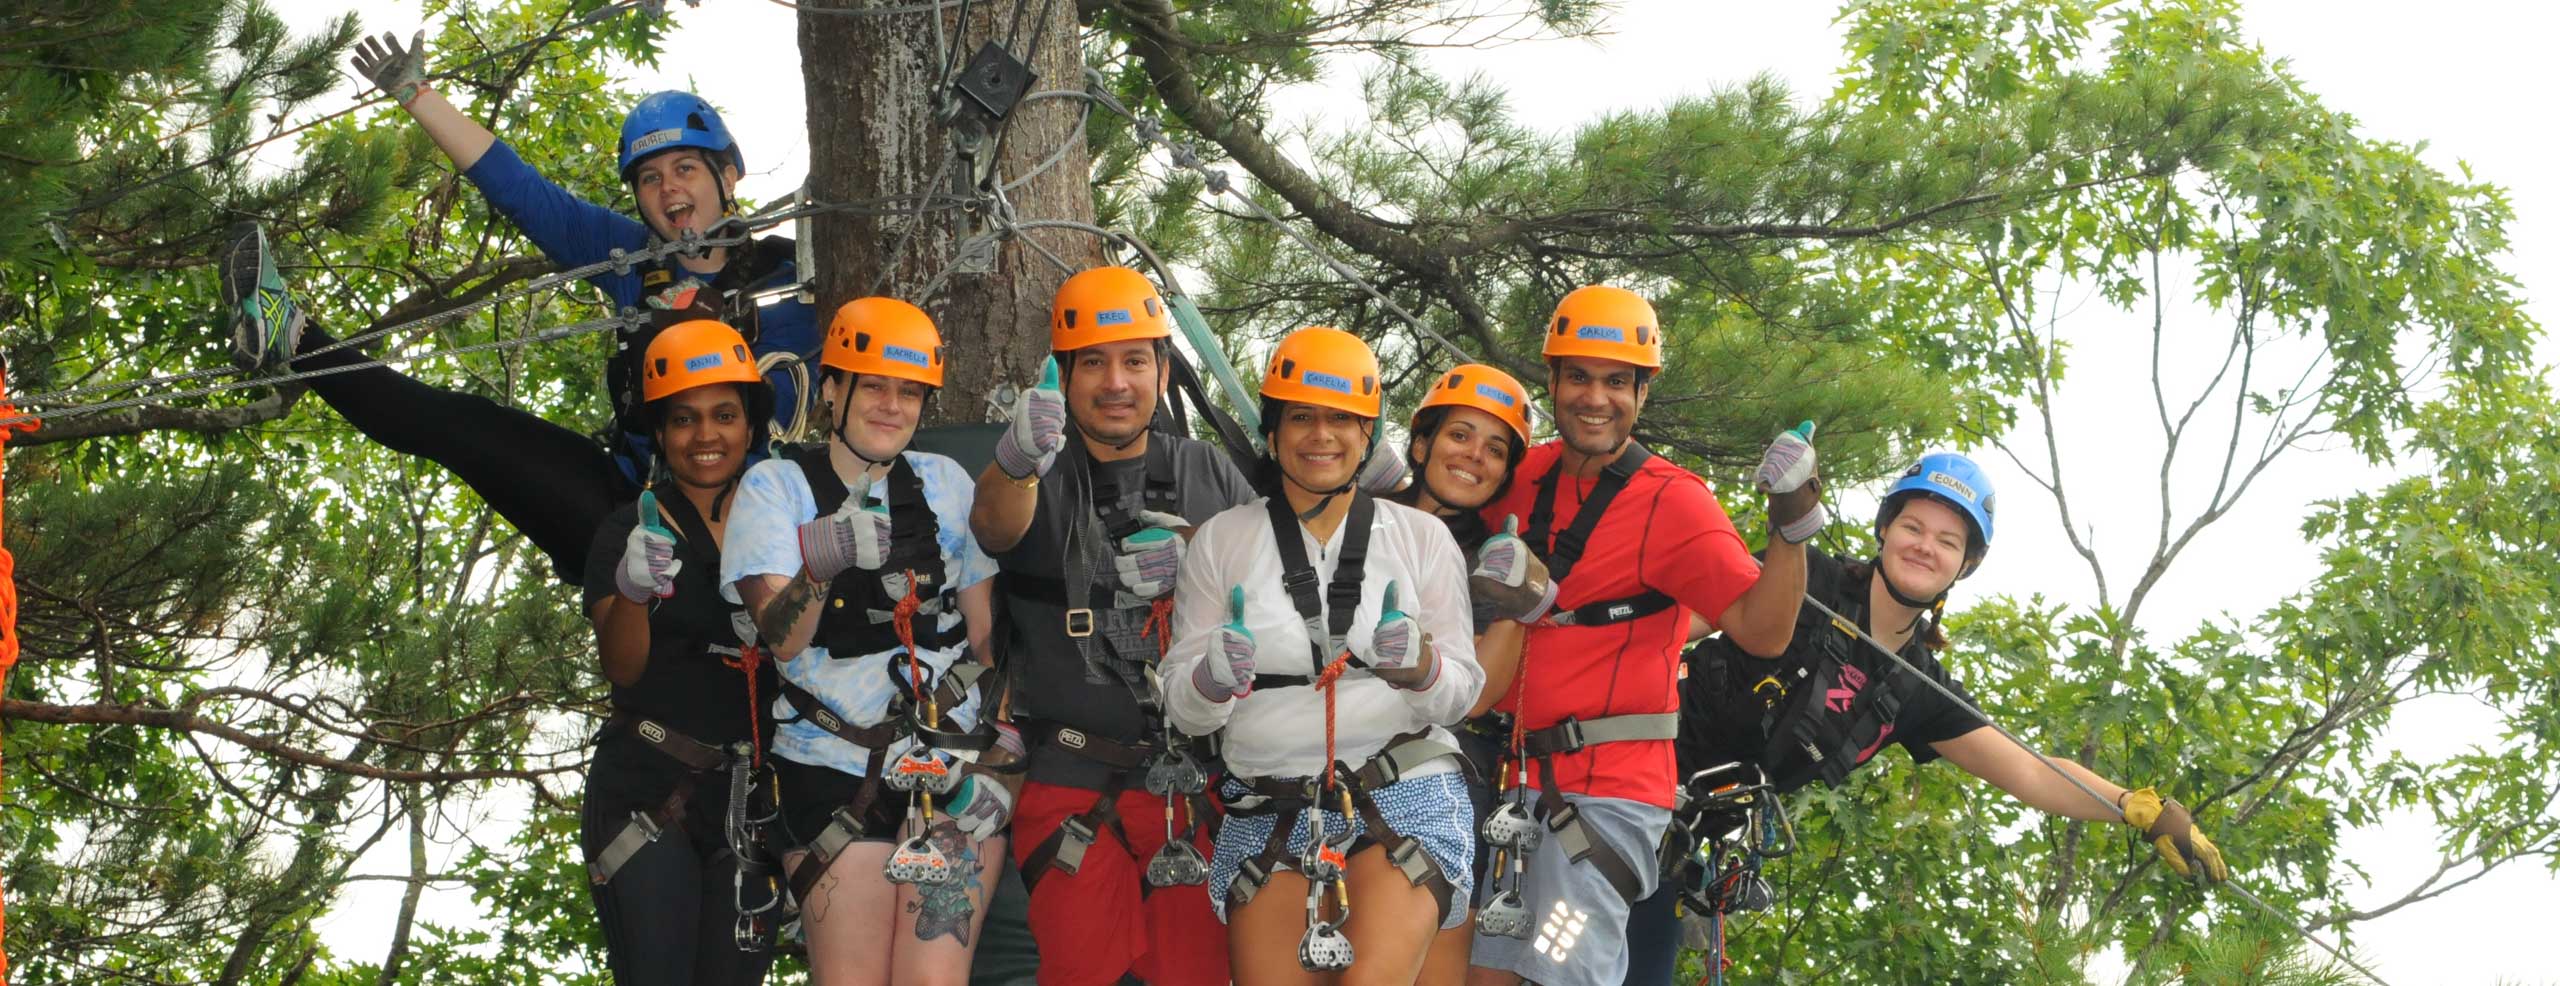 Group of people in zip line gear all standing on a zip line platform high in the trees